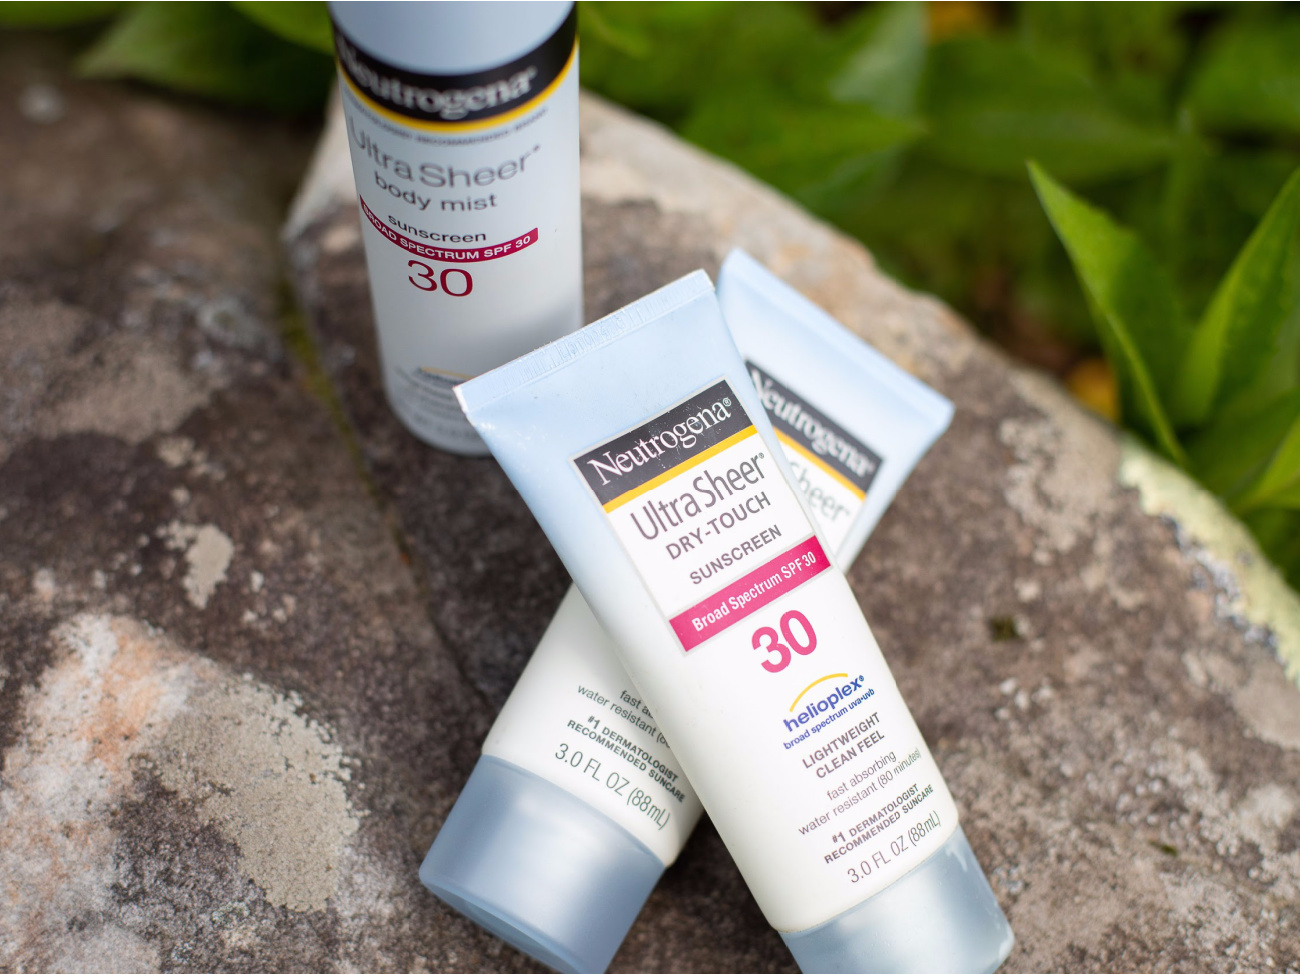 Neutrogena Sun Care Products As Low As $3 At Kroger (Regular Price $9.99)